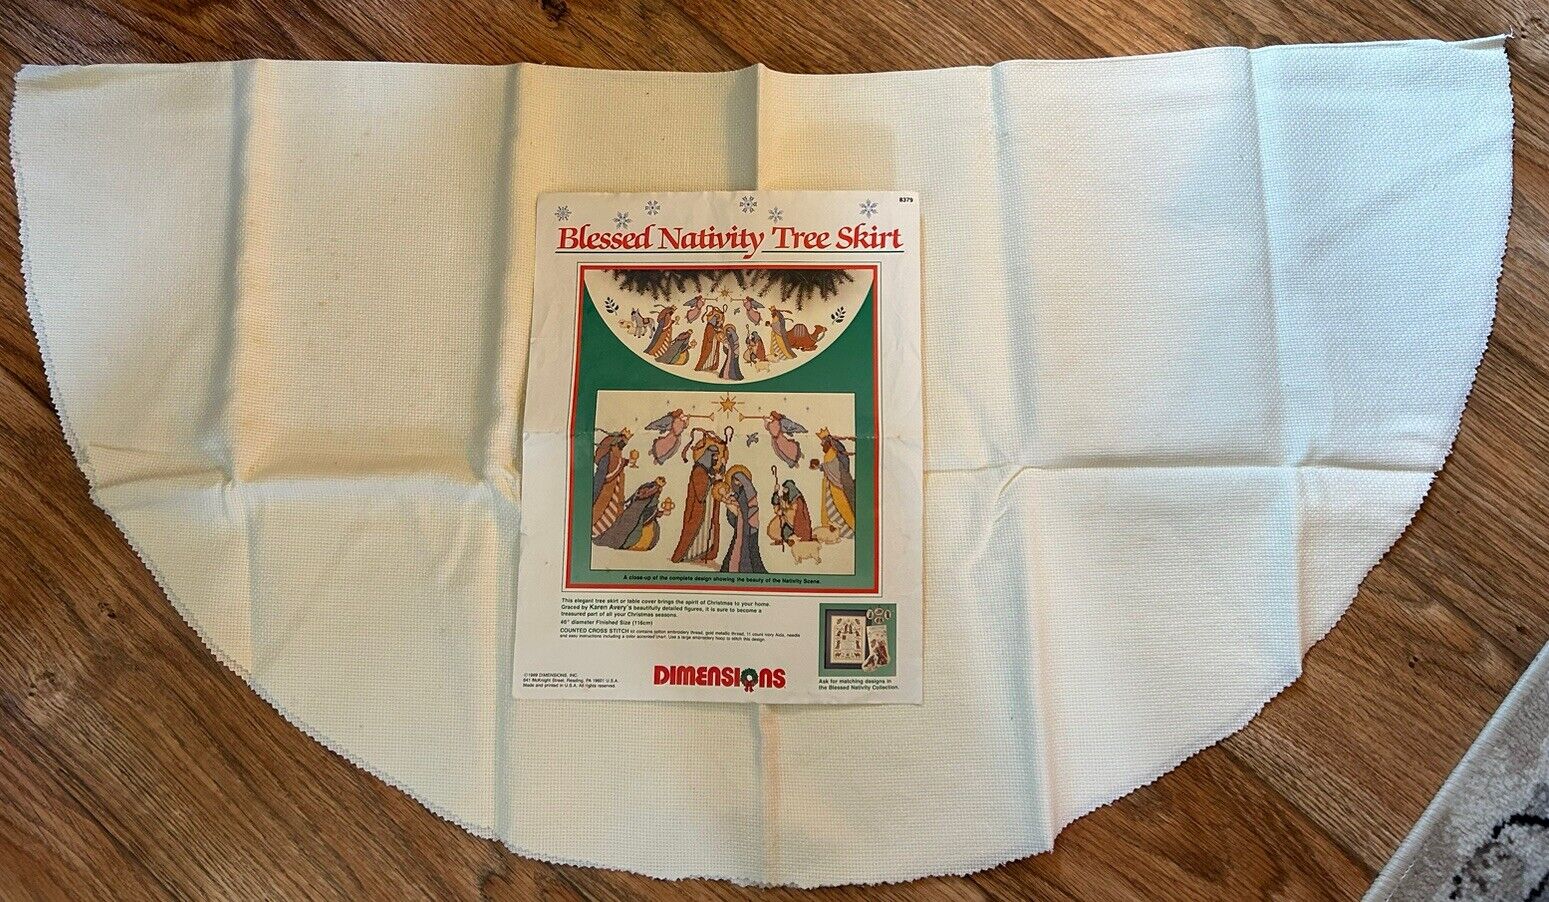 VINTAGE BLESSED NATIVITY TREE SKIRT any DIMENSIONS from 1989 kit (46” Diameter)